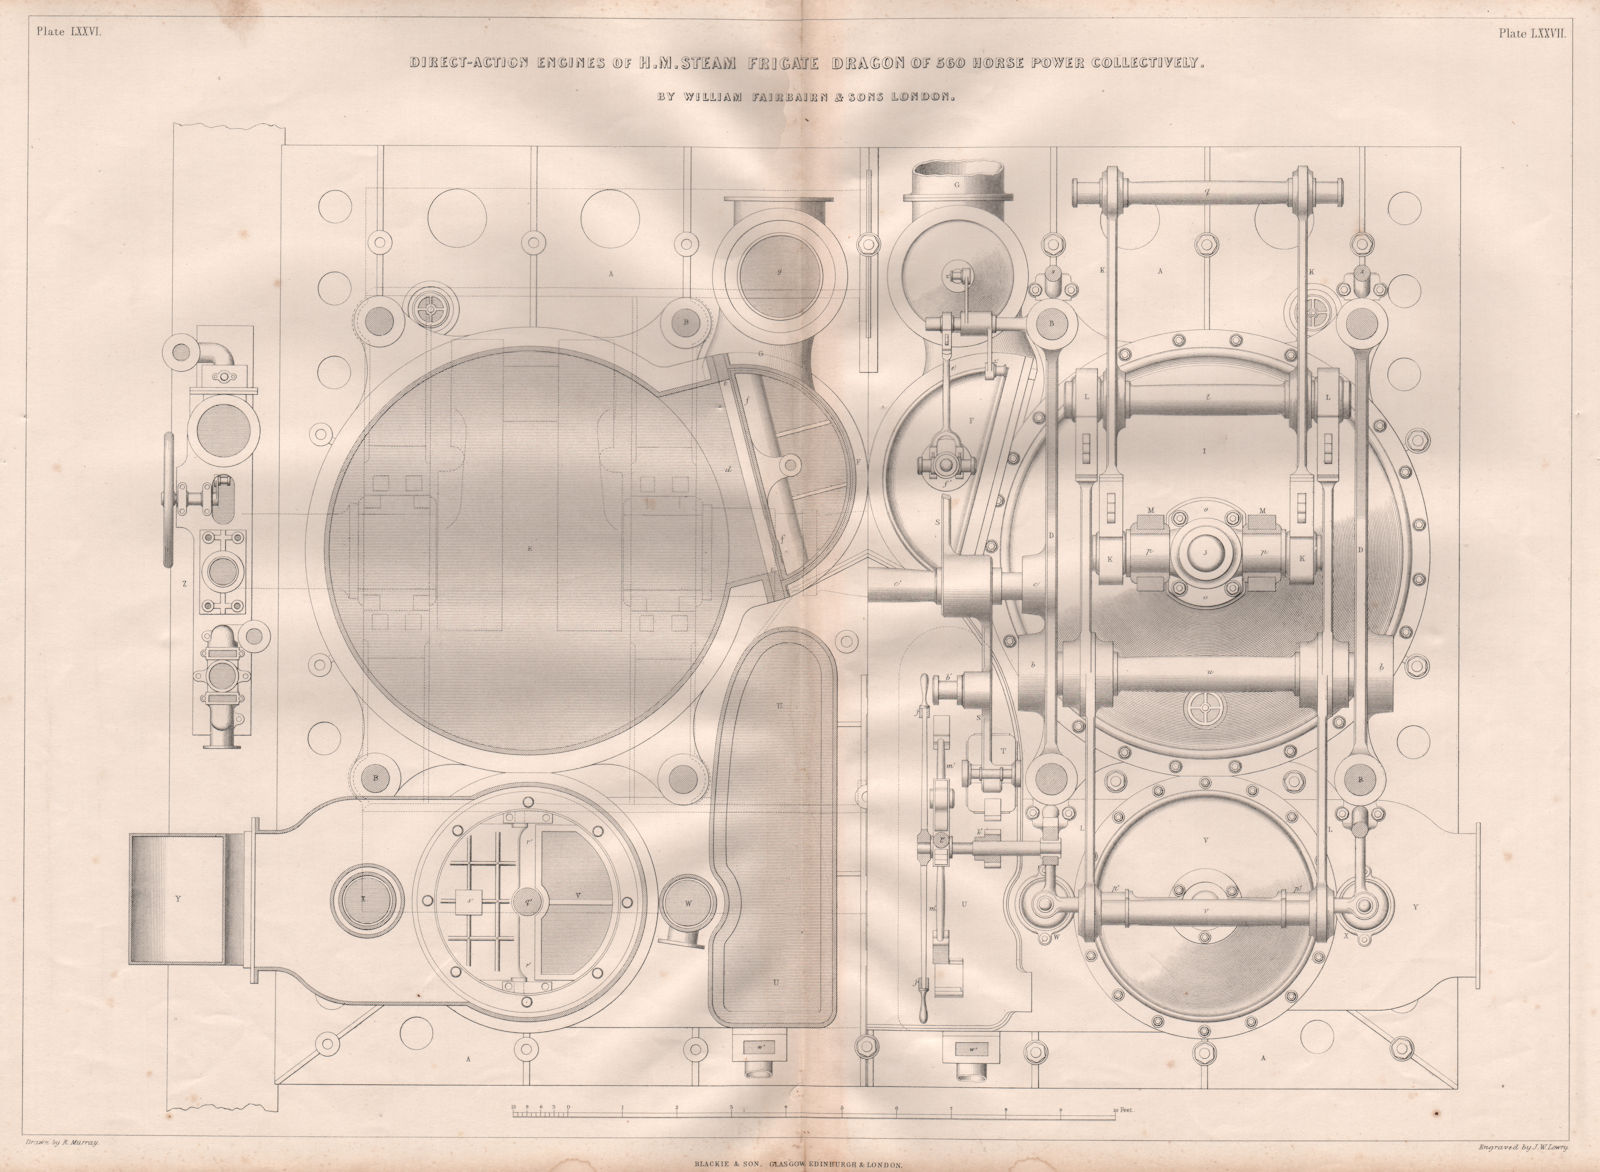 19C ENGINEERING DRAWING. Direct-action engines of HM Steam Frigate Dragon 1847